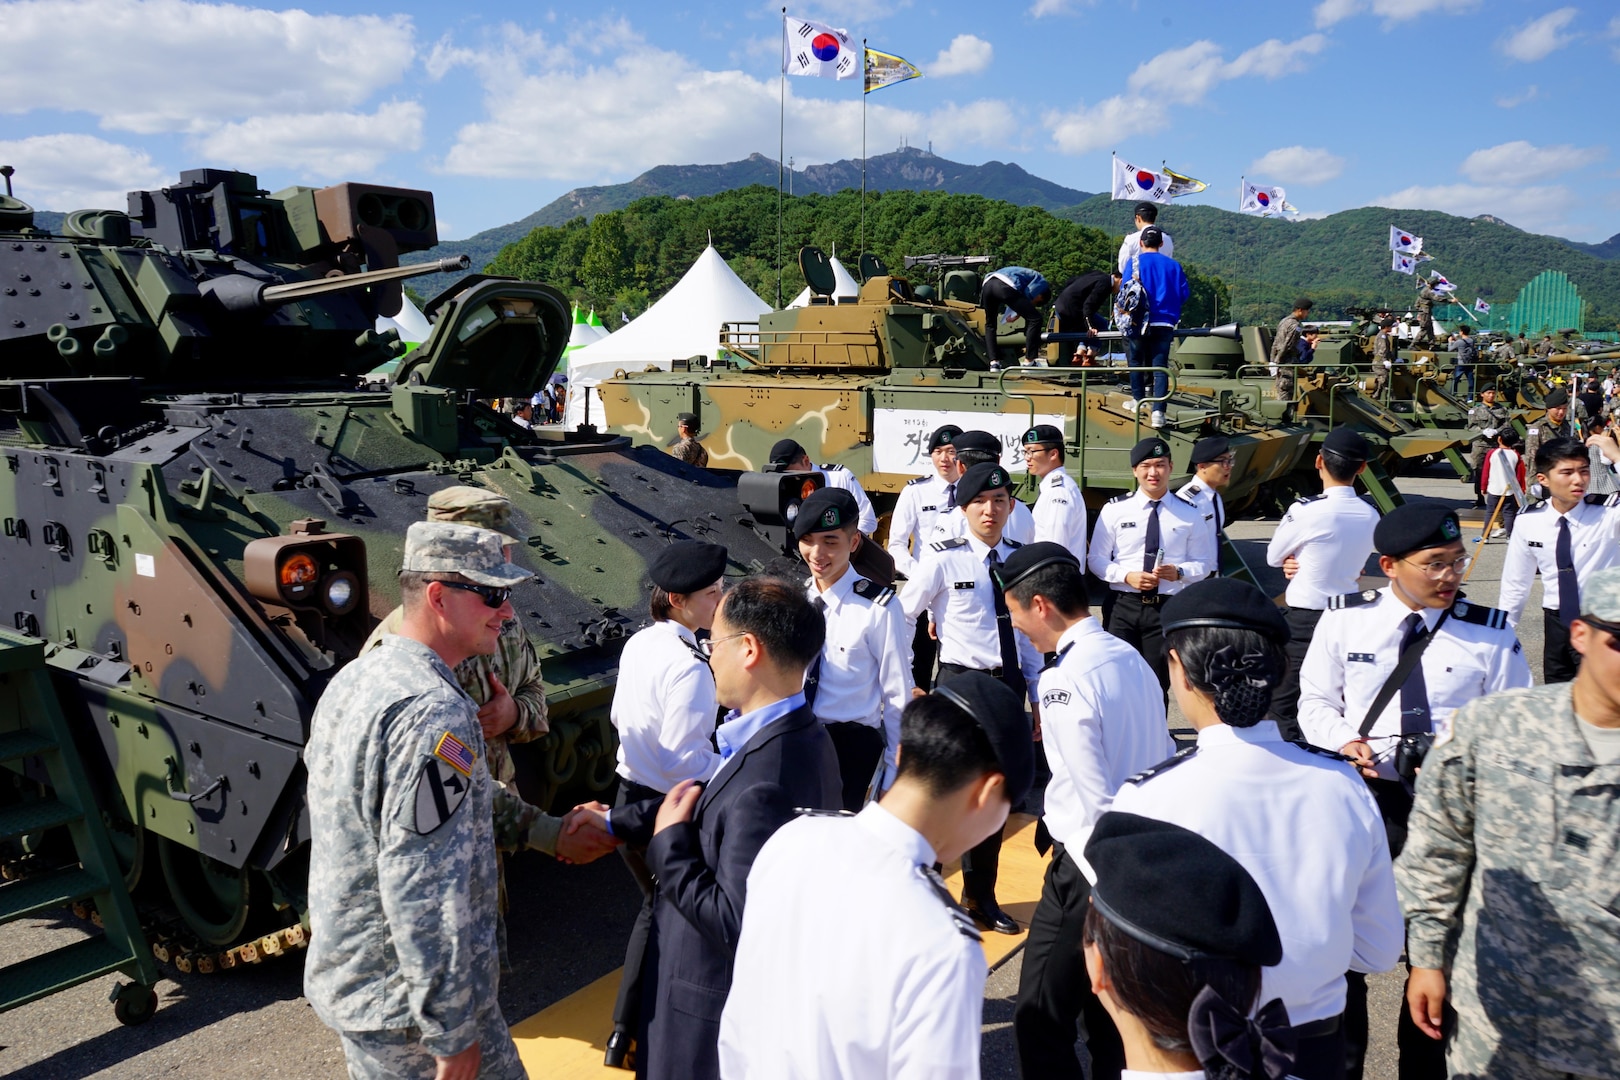 South Korean cadets get a close up look at a U.S. Bradley Fighting Vehicle at the 2015 Republic of Korea Ground Forces Festival in Gyeryong, South Korea Oct. 2, 2015.